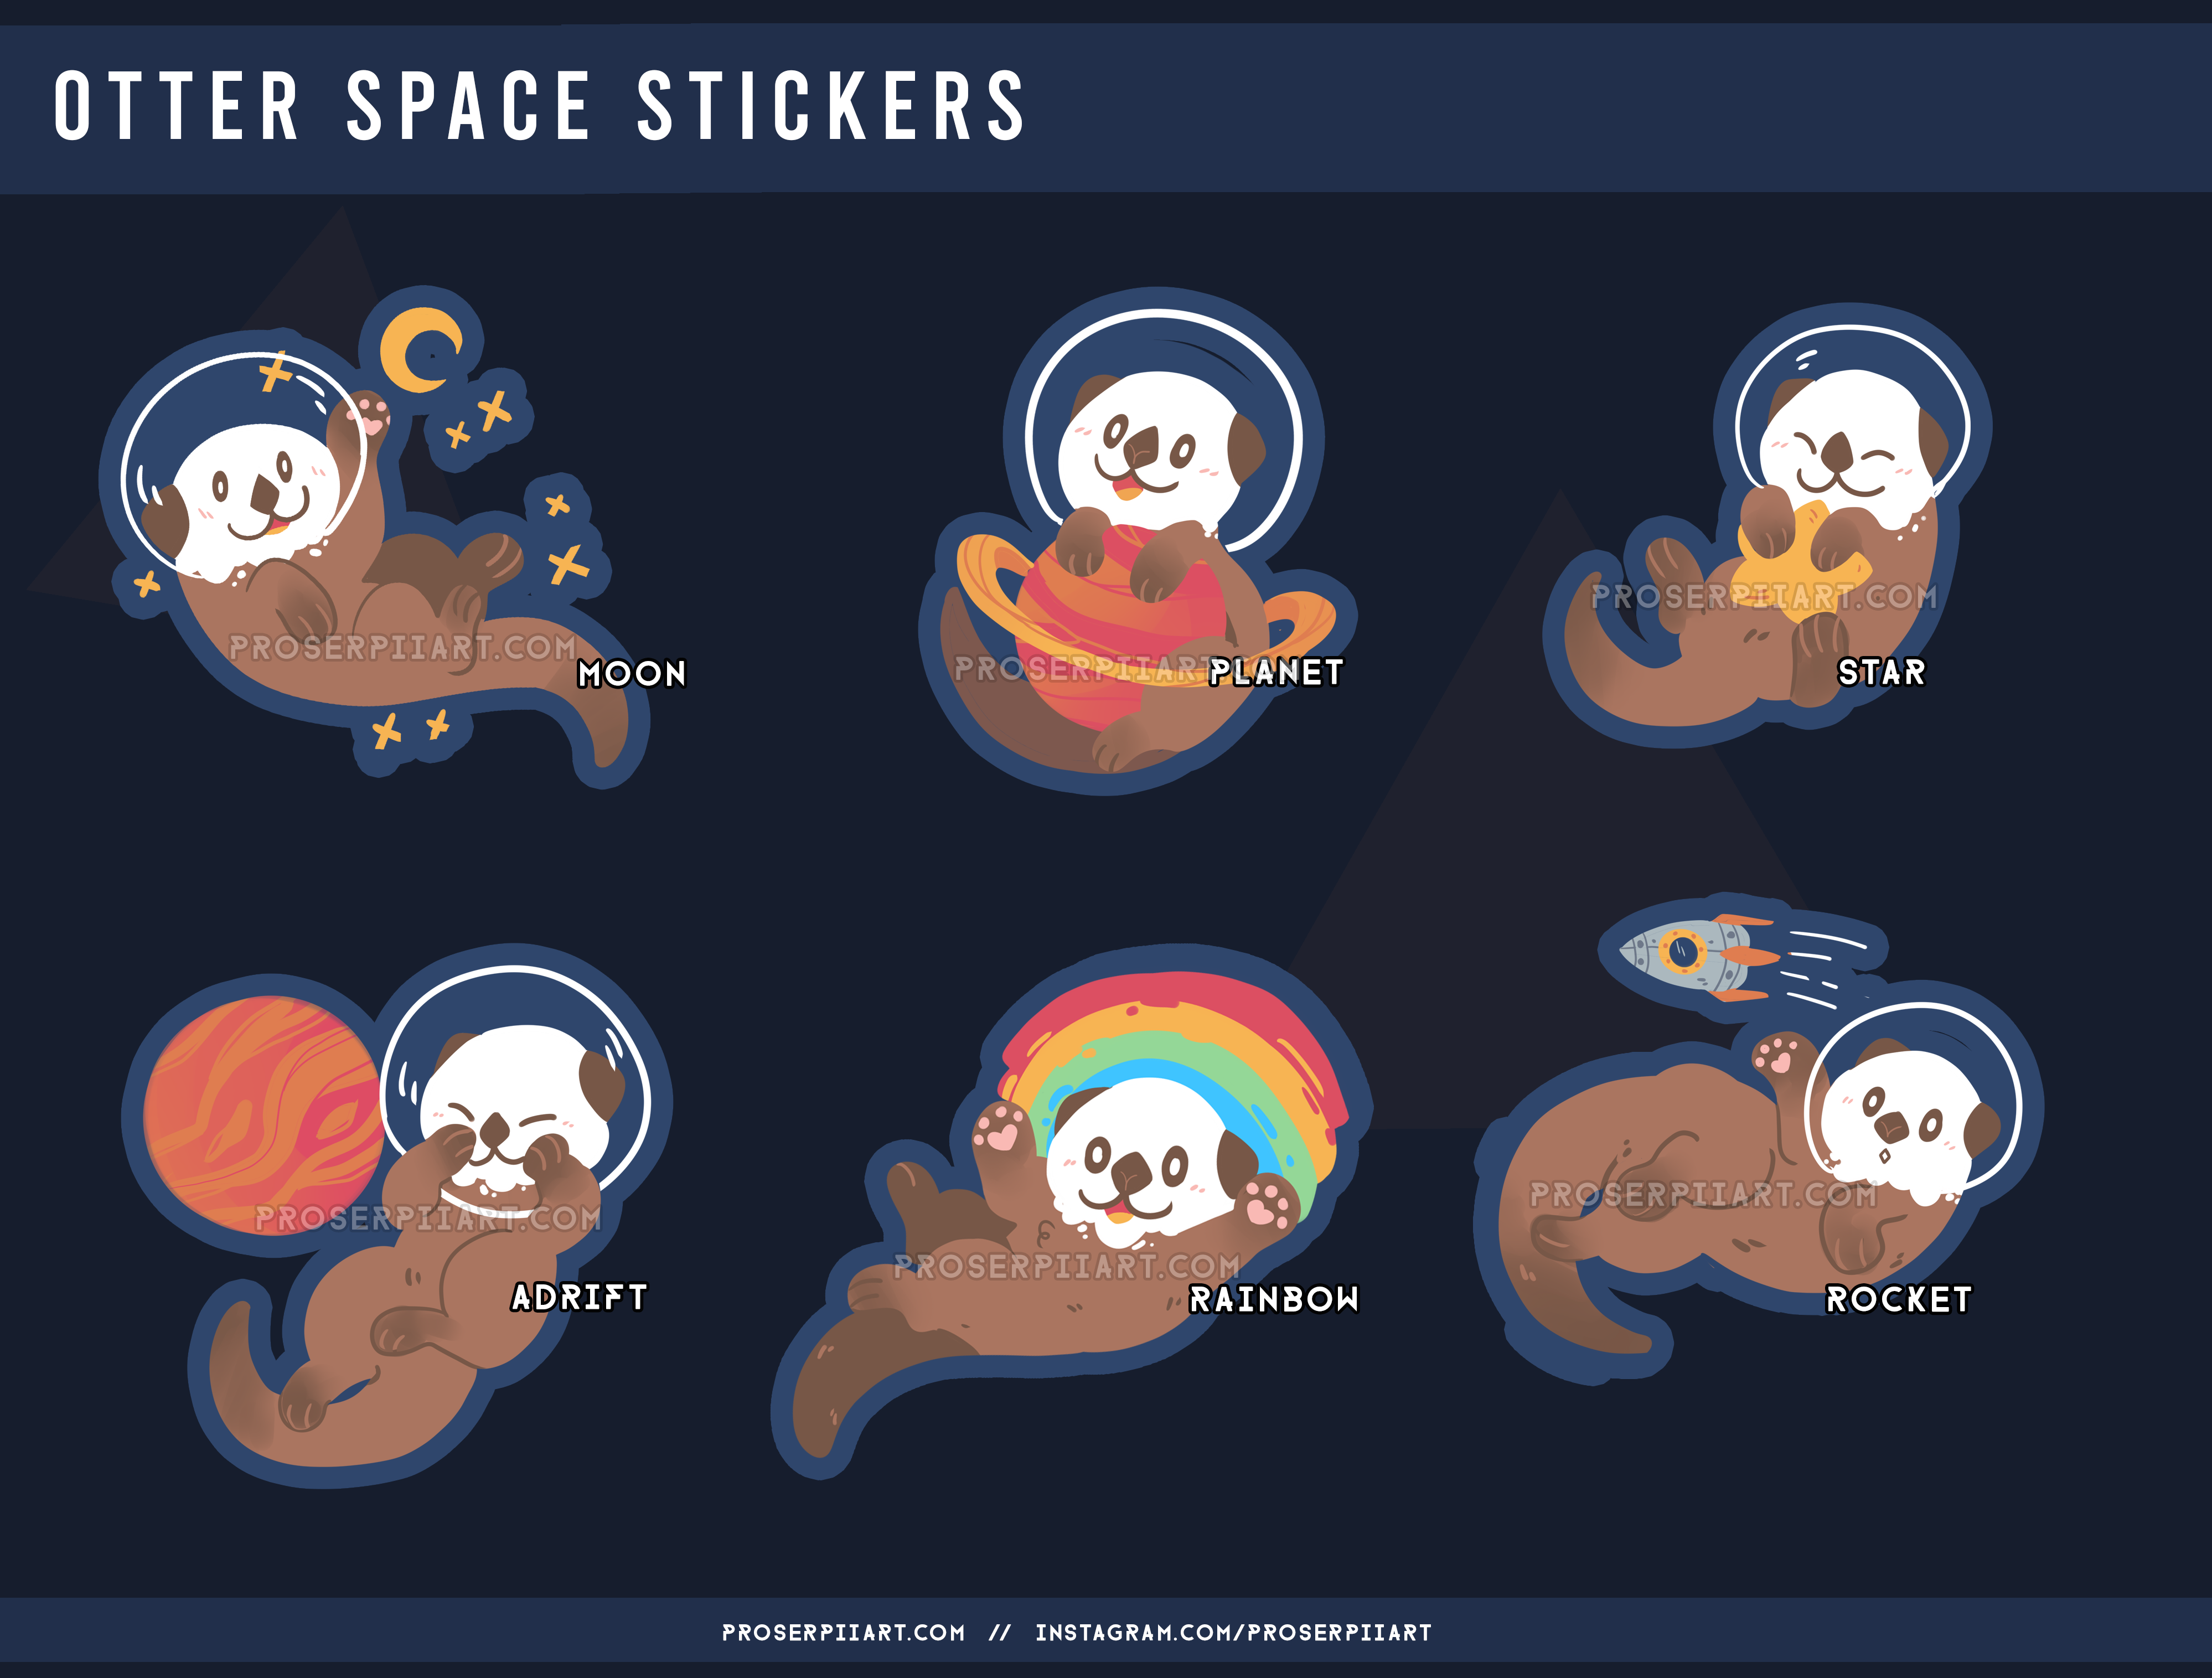 Otter Space Stickers – proserpiiart